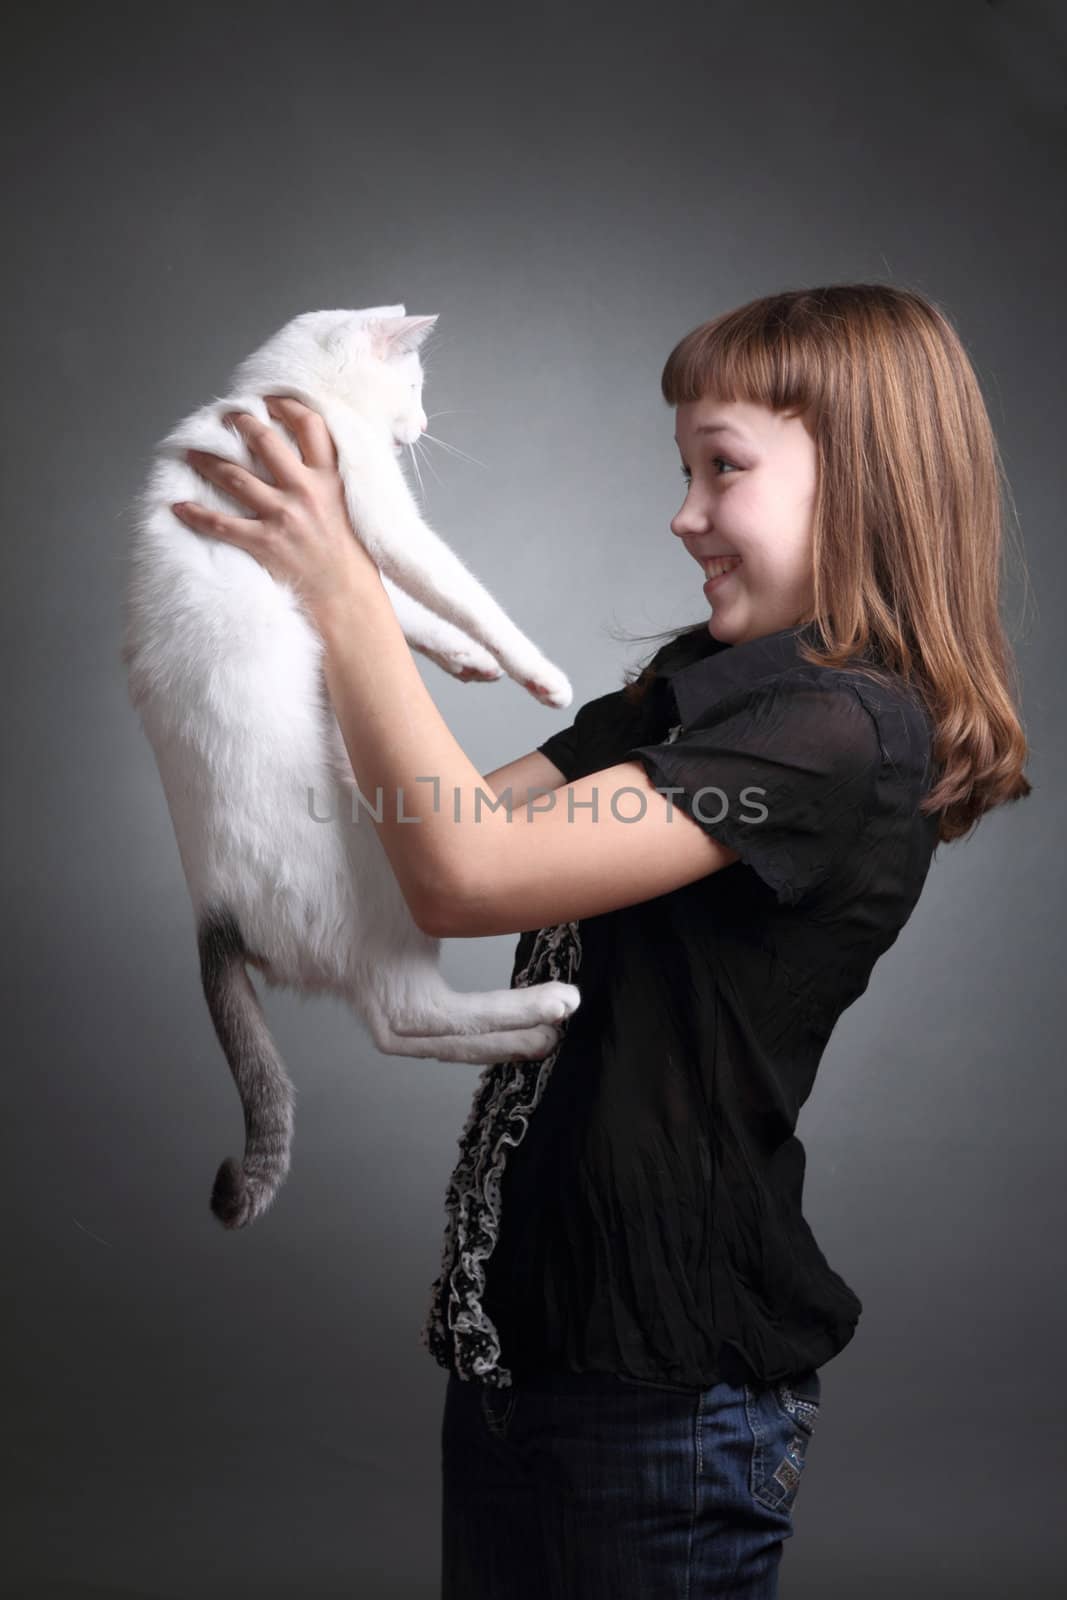 the girl and white cat play. close up. double 4
